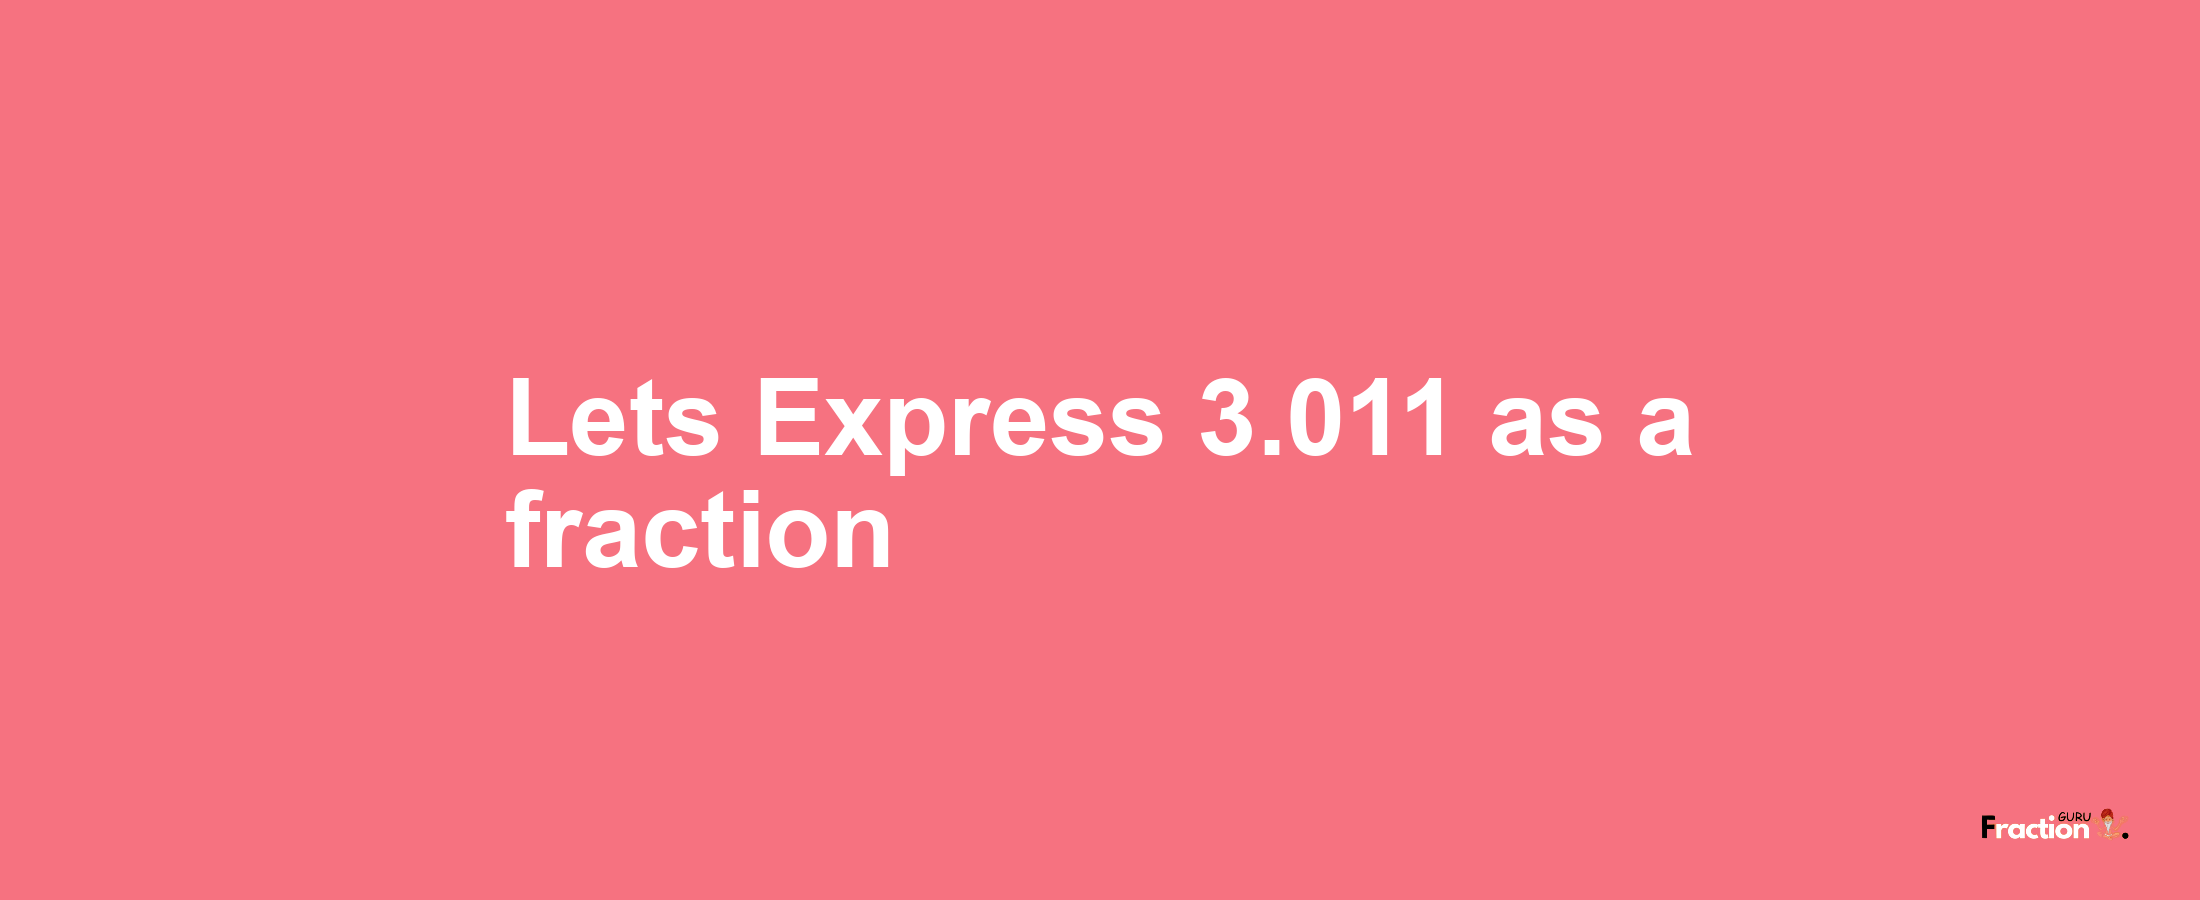 Lets Express 3.011 as afraction